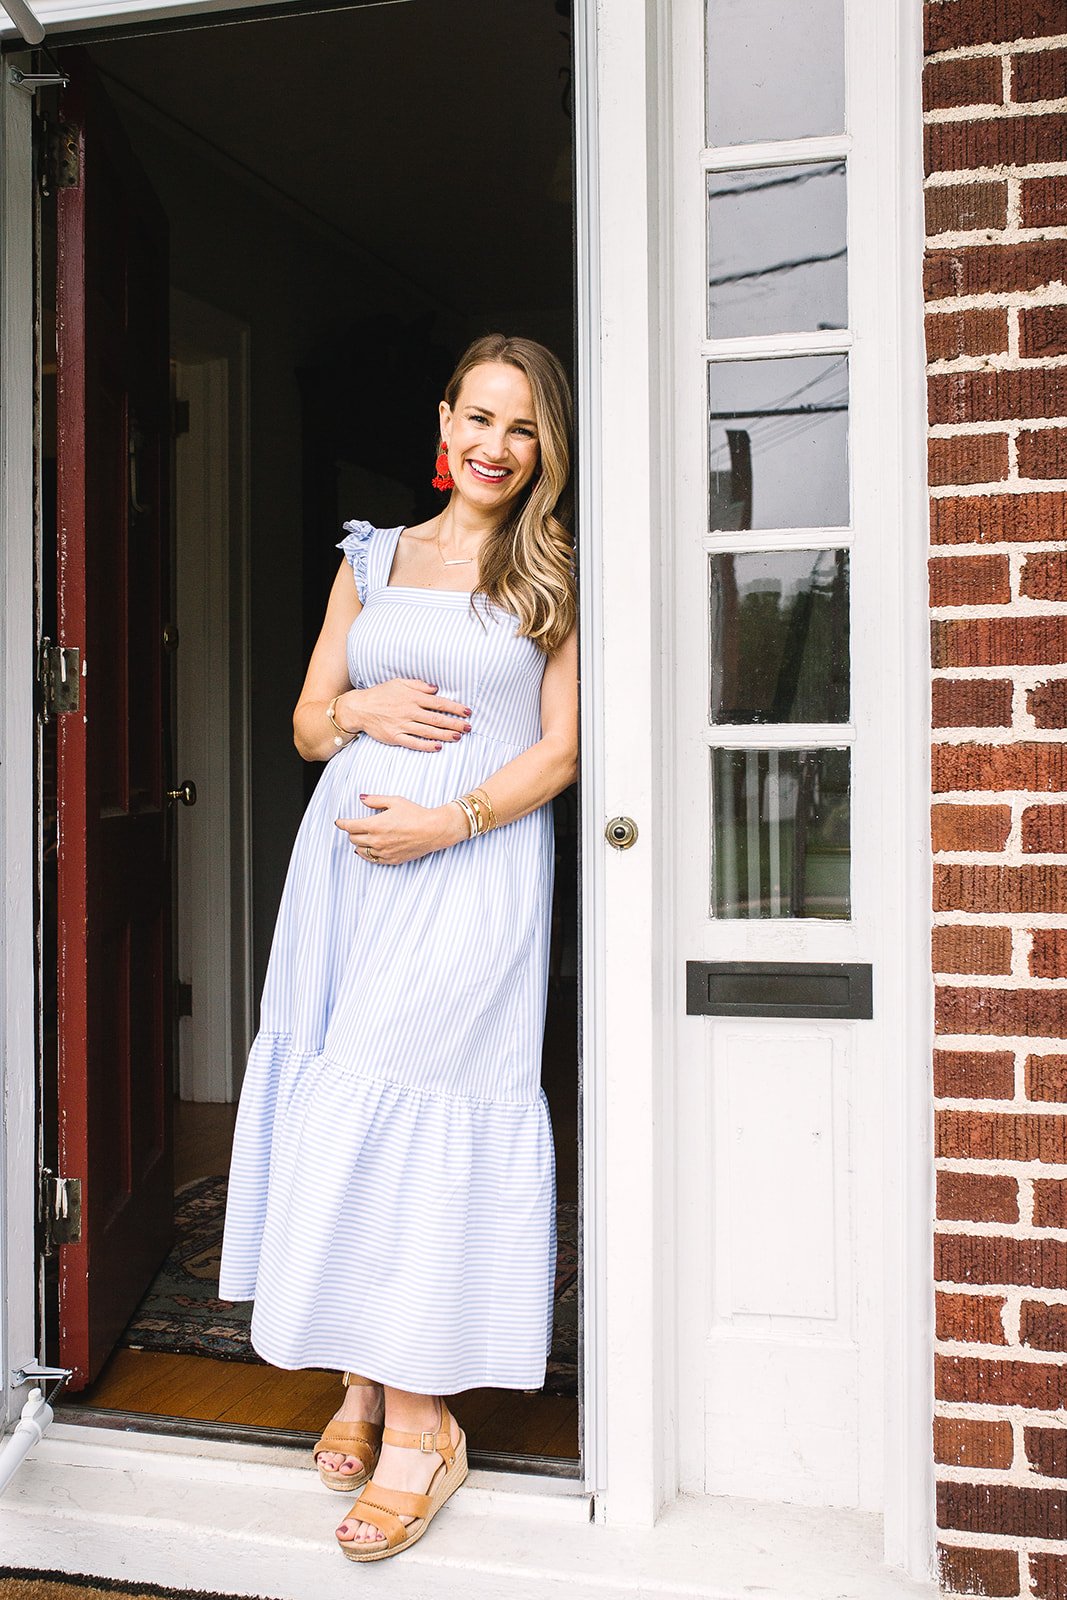 My Pregnancy Must-Haves for Common Woes